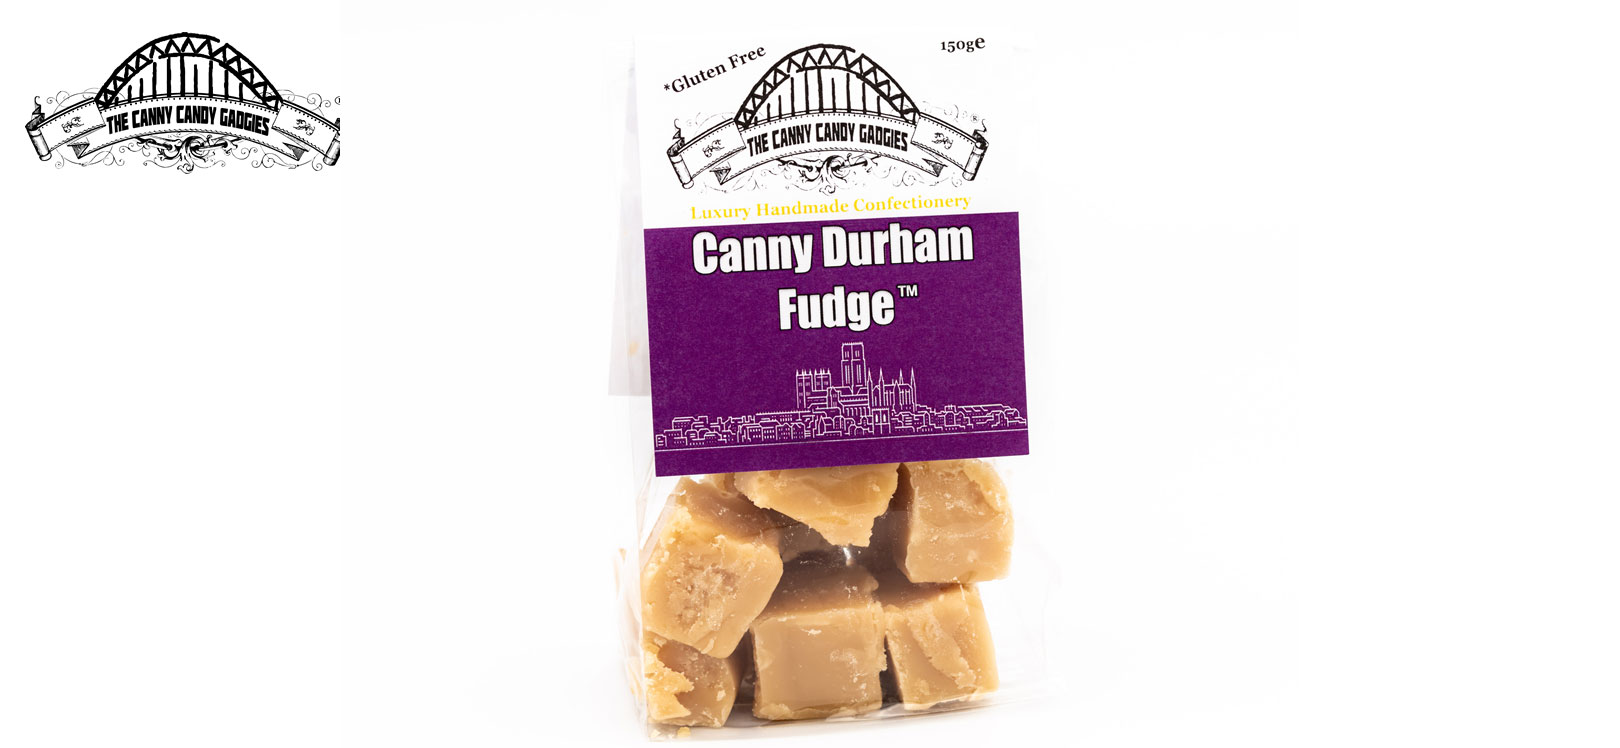 Canny Durham Fudge at The Canny Candy Gadgies